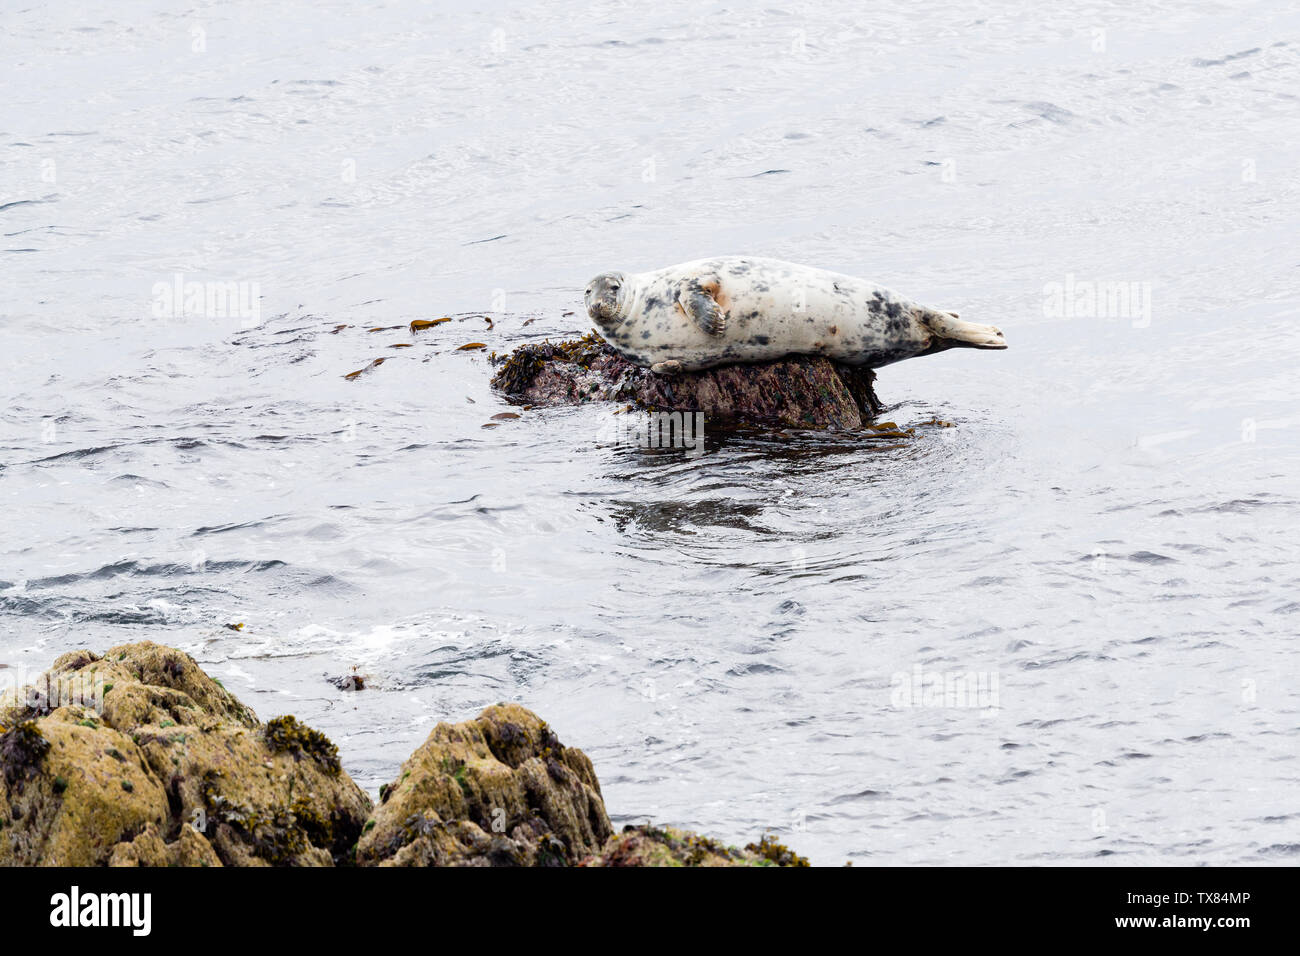 A grey seal (Halichoerus grypus) sits on a rock in the harbour at Skokholm Island Pembrokeshire Wales UK Stock Photo